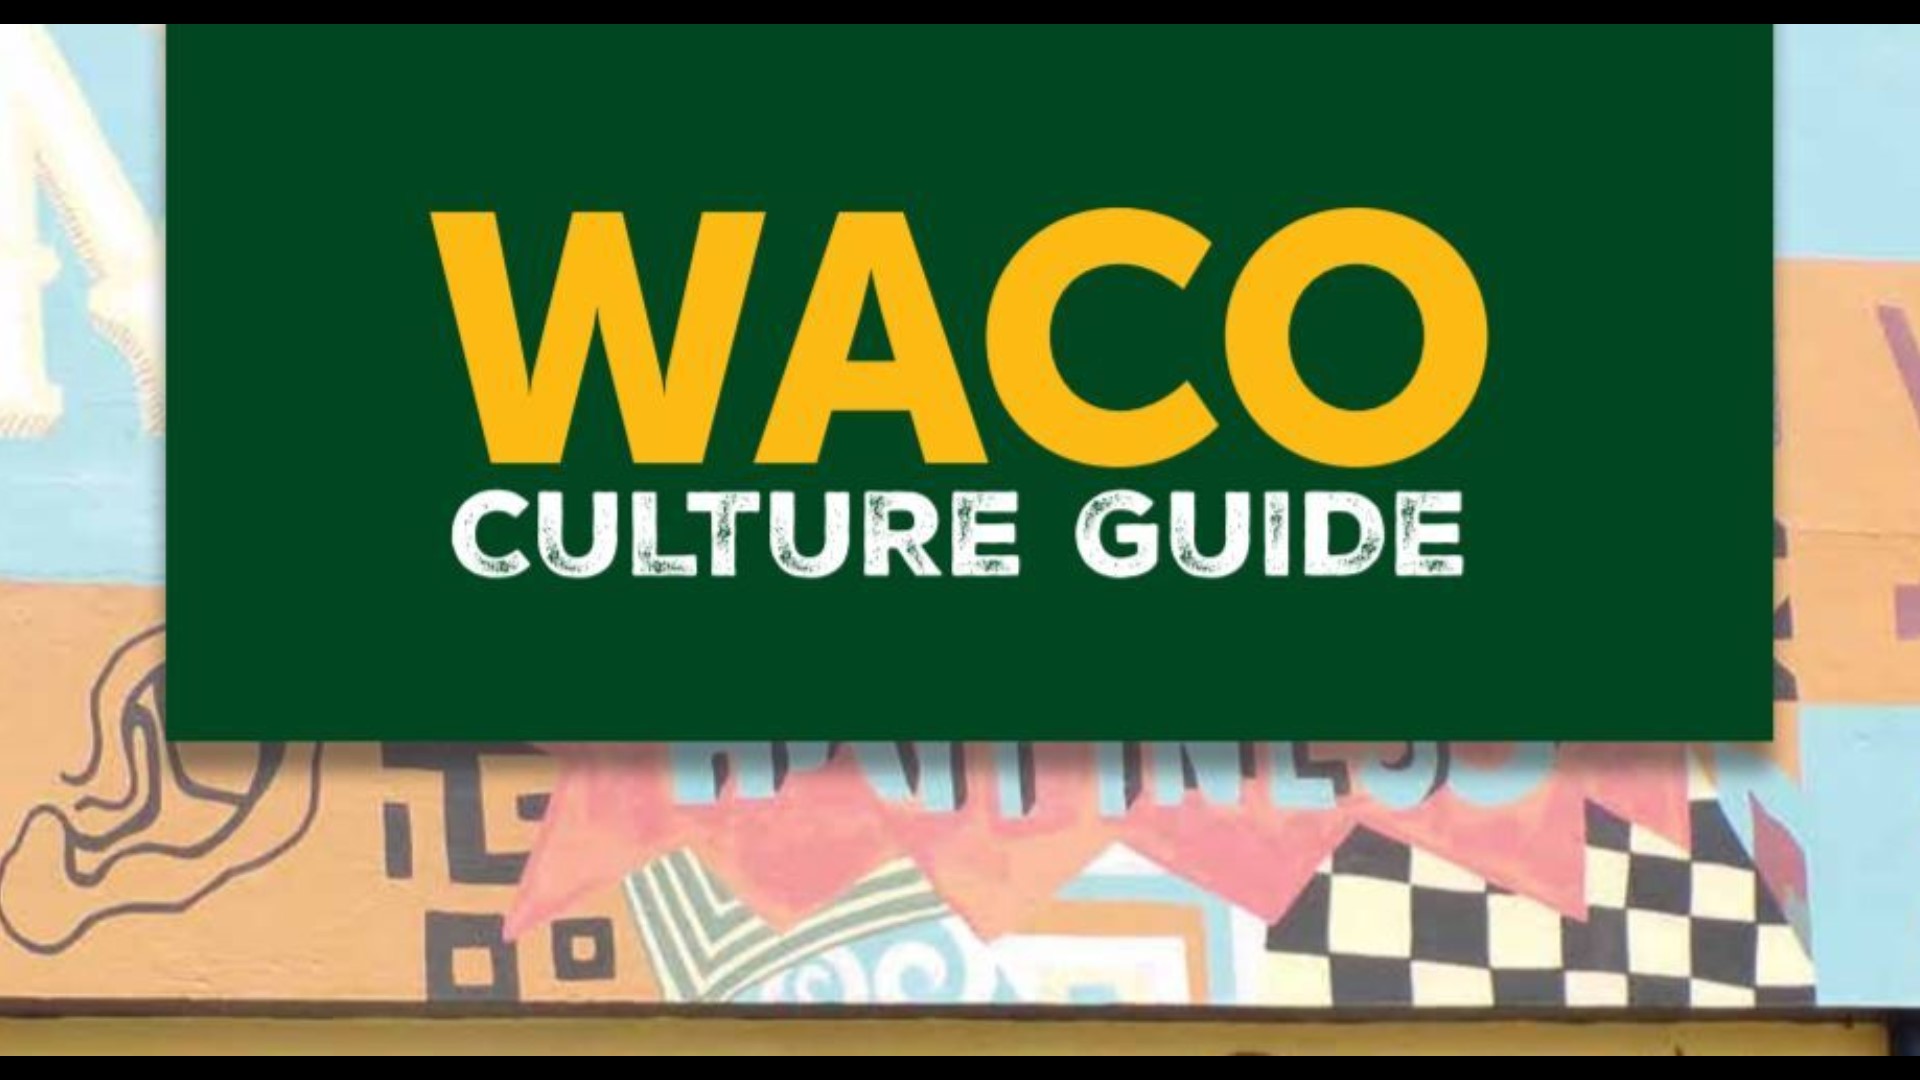 The Waco Culture Guide was put together by Baylor's Solid Gold Neighbor Program. The culture guide is to help highlight diversity in the city.